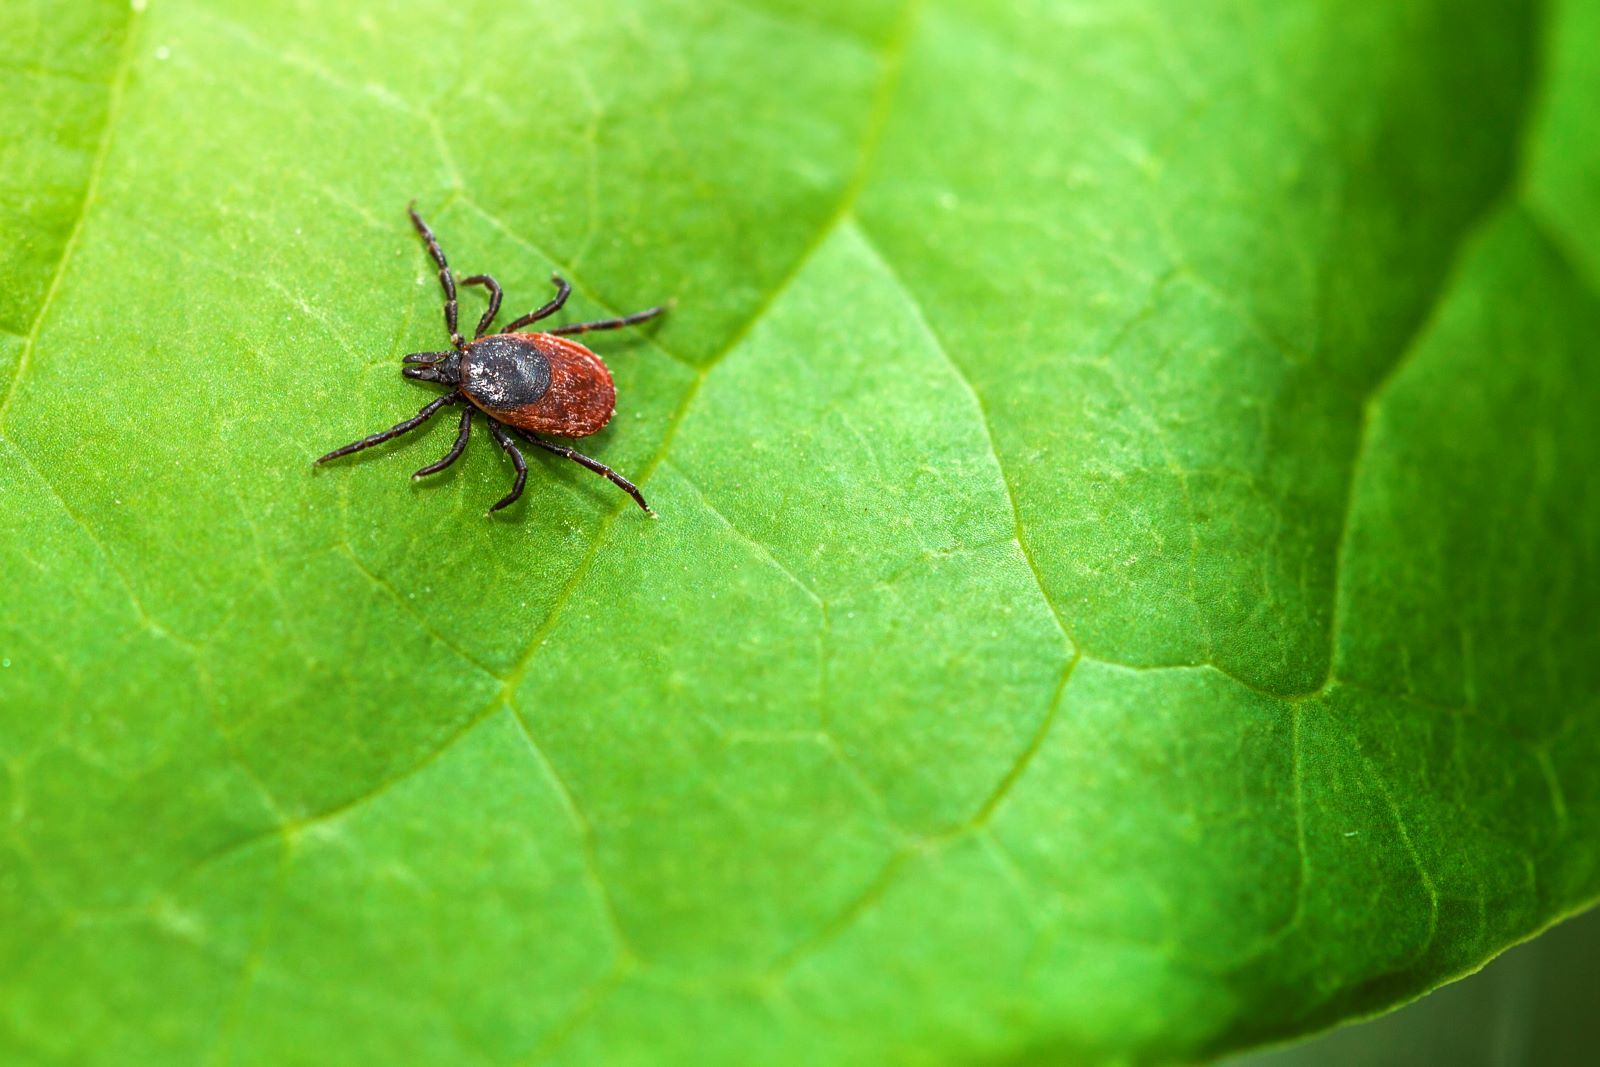 Here are 3 steps you can take to prevent Lyme disease and other tick-borne illnesses, after a mild winter leads to a worse tick season.